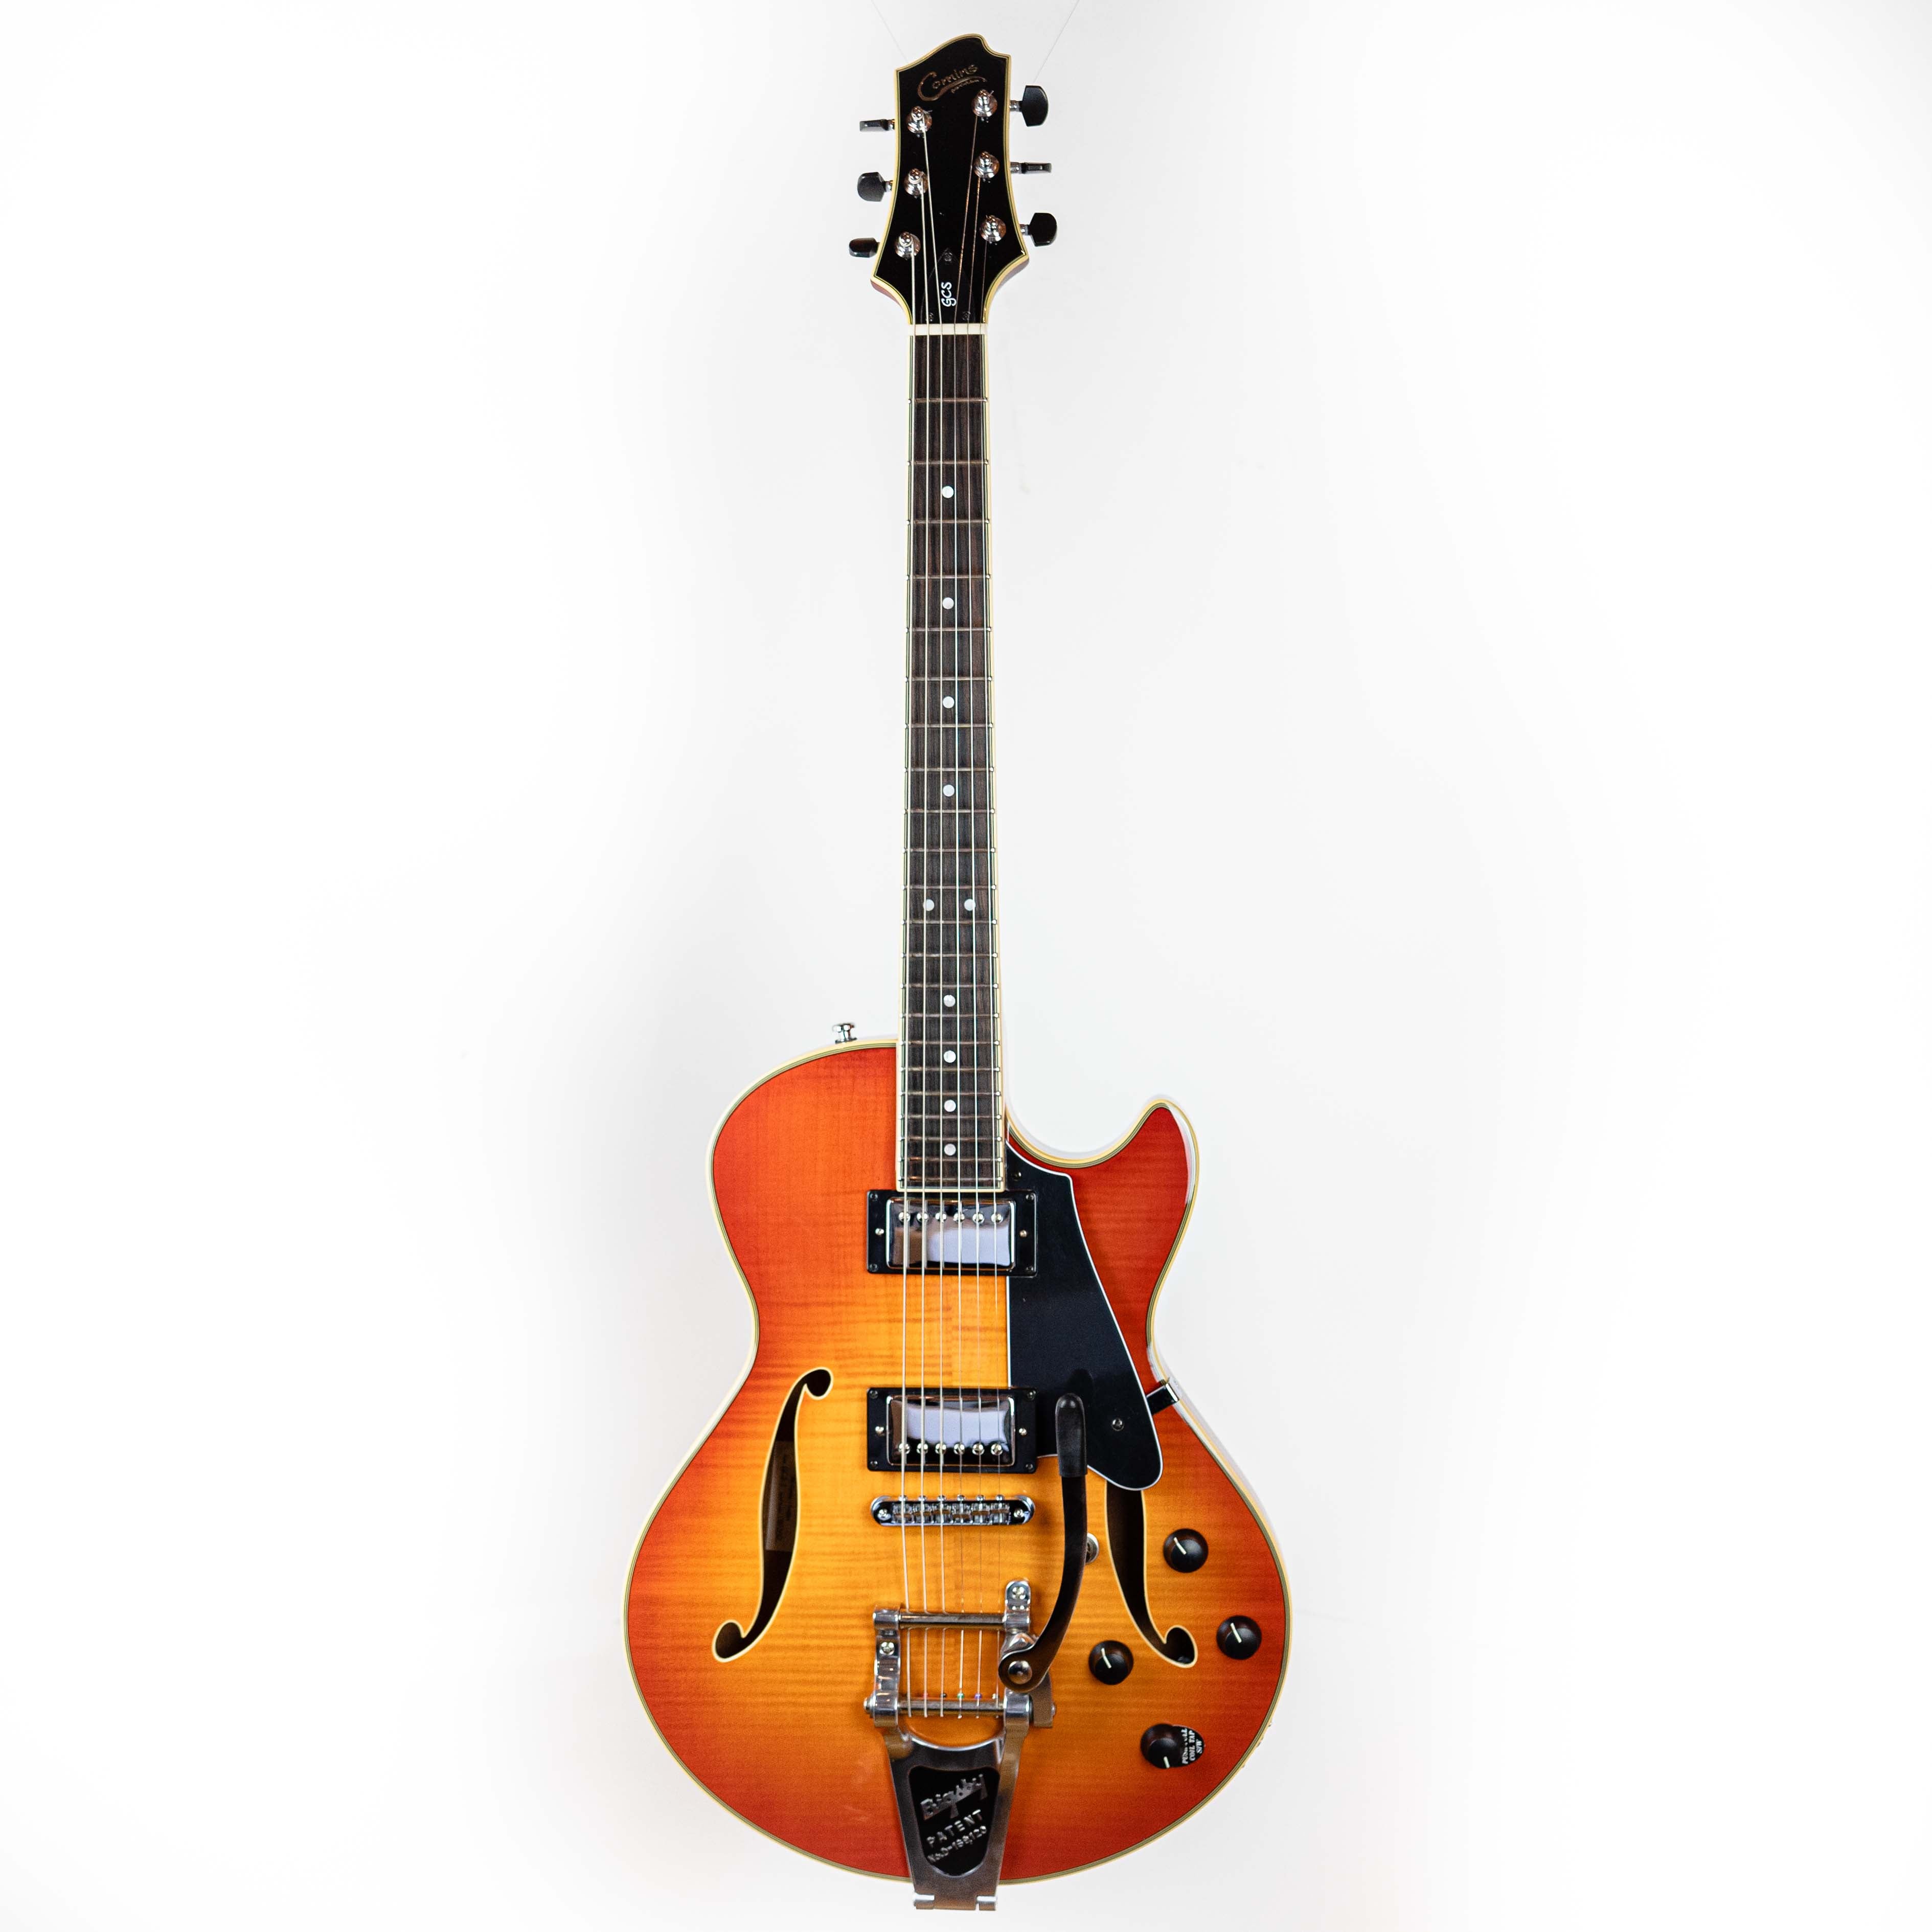 Comins GCS-1 in Violin Burst with Bigsby